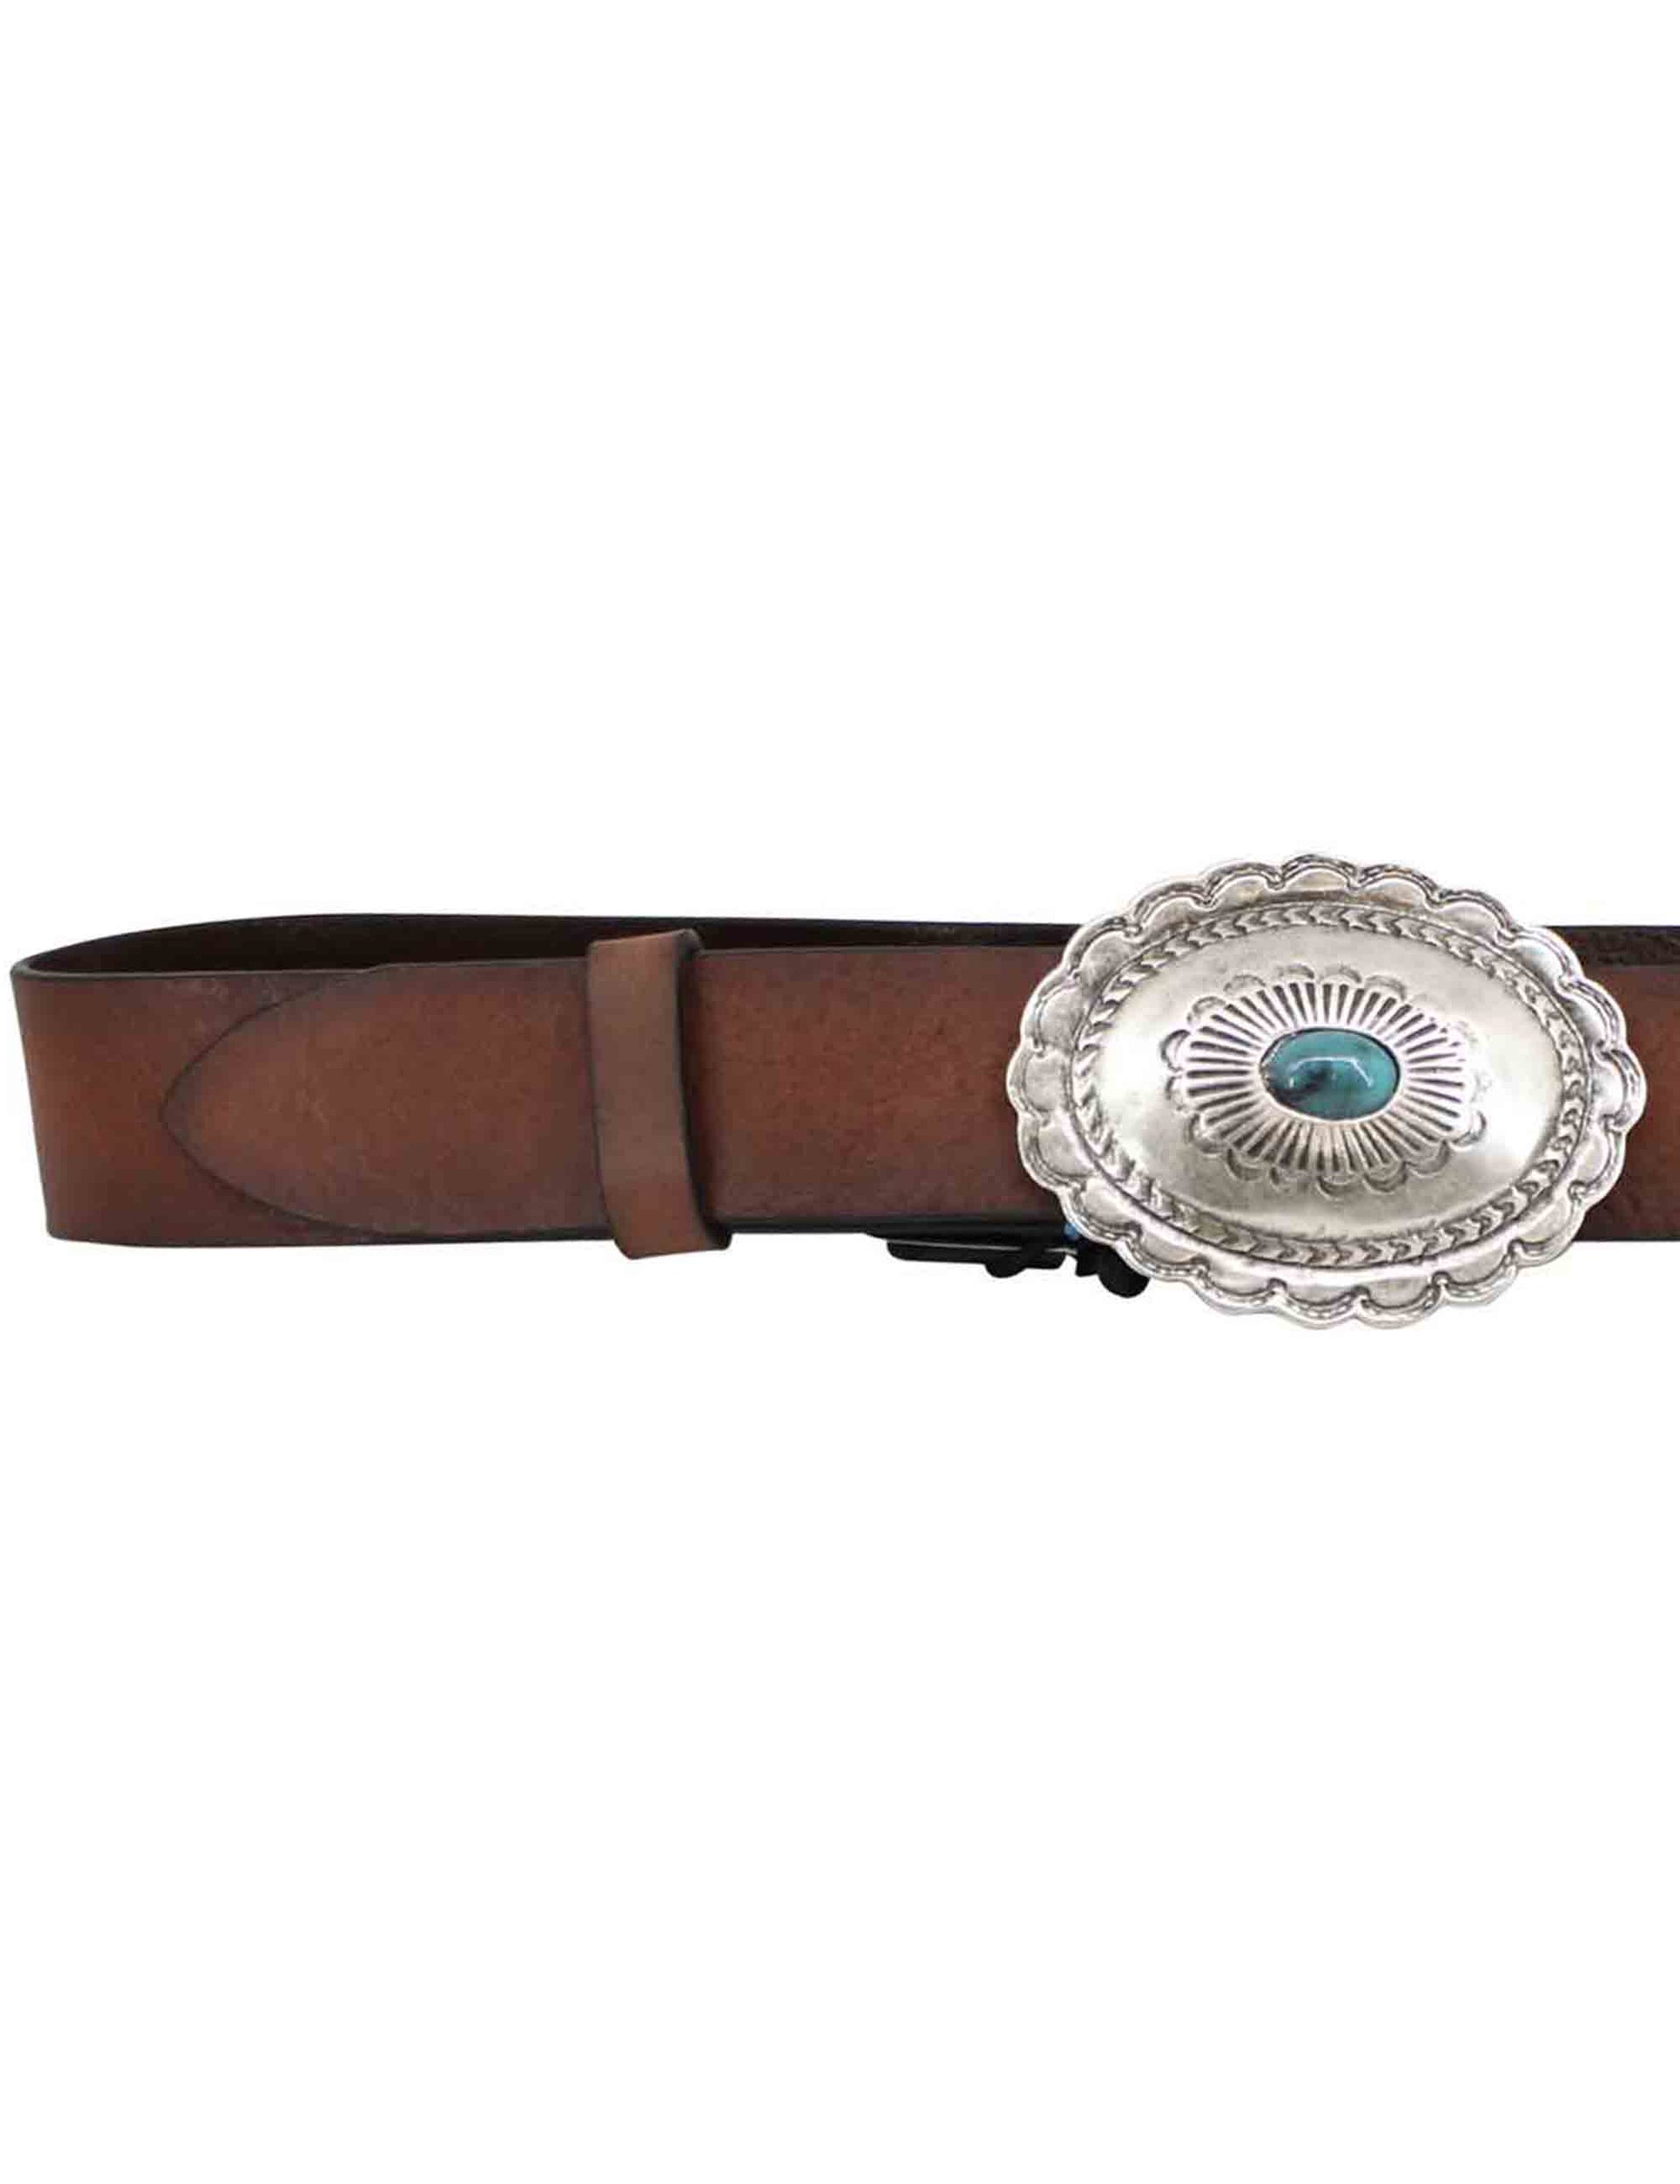 Women's tan leather belts with silver and turquoise buckle